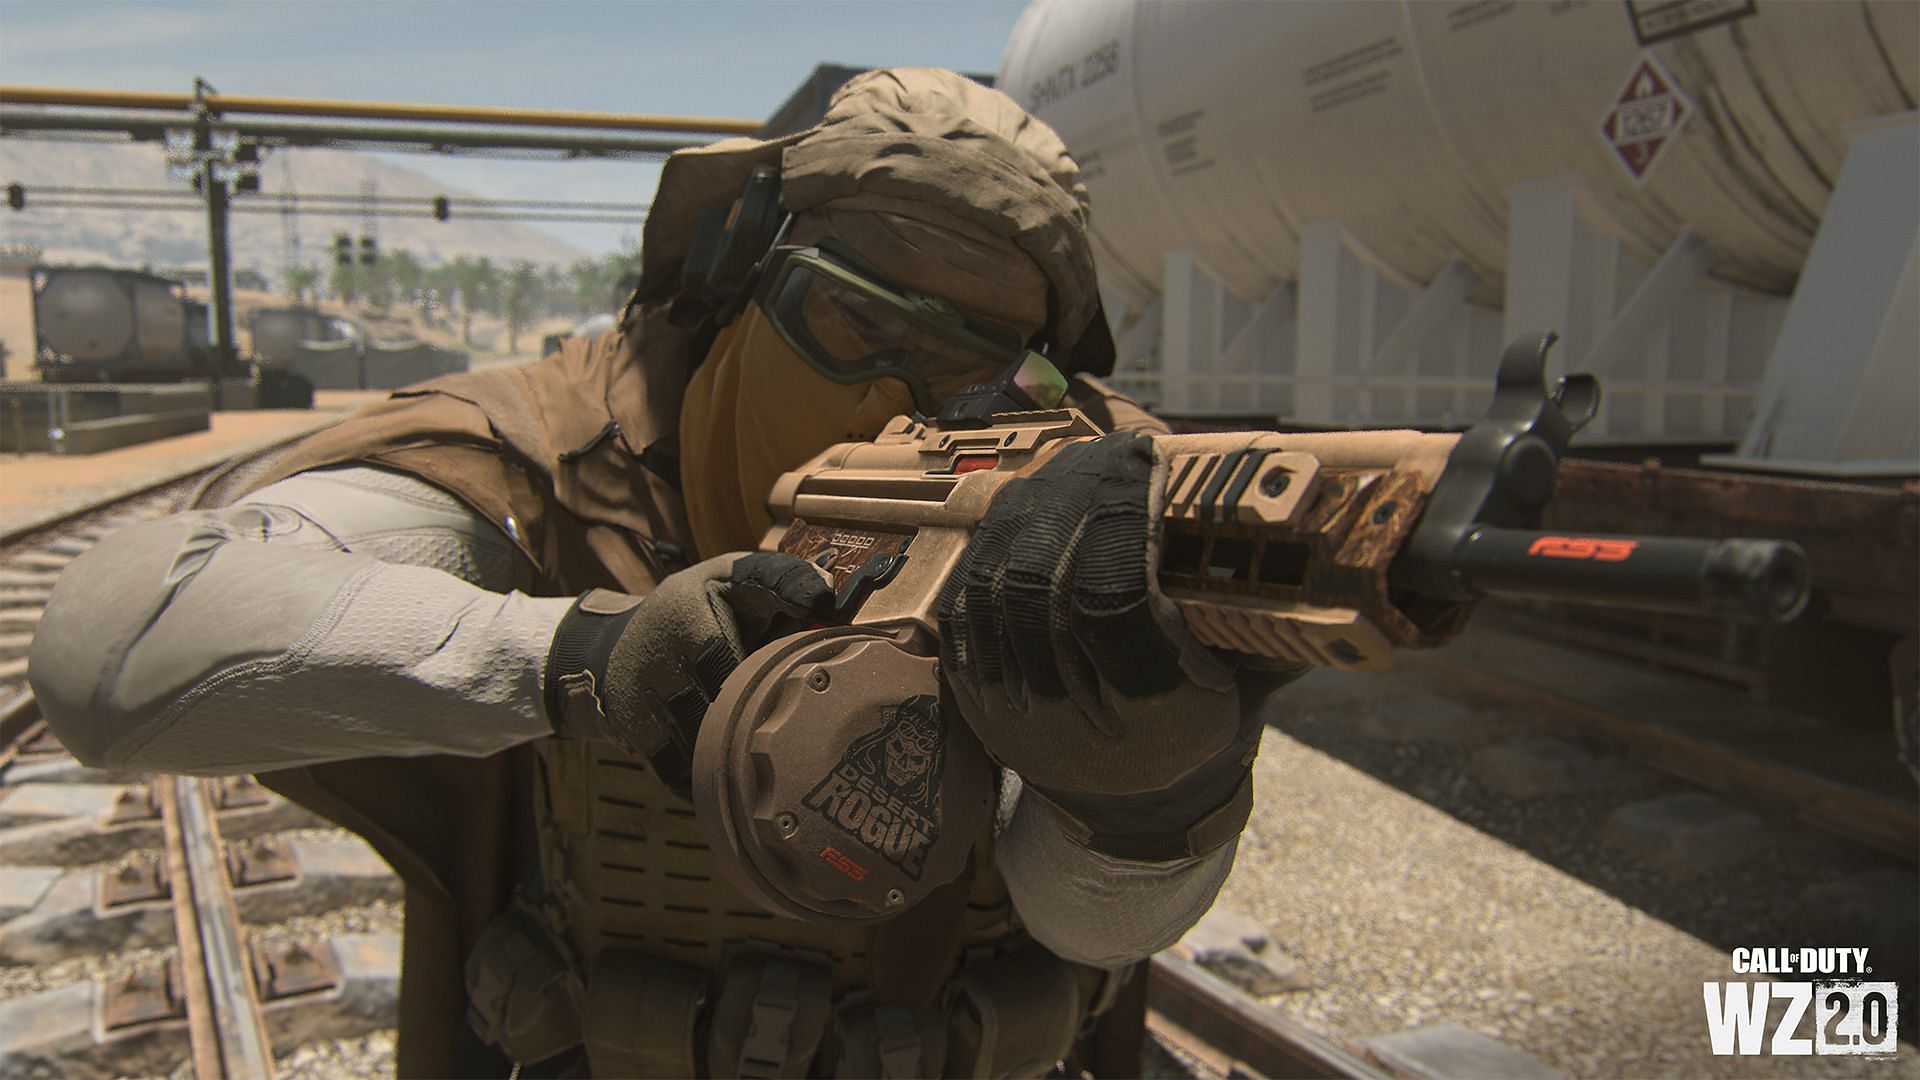 An Operator aim down the sight at a target.